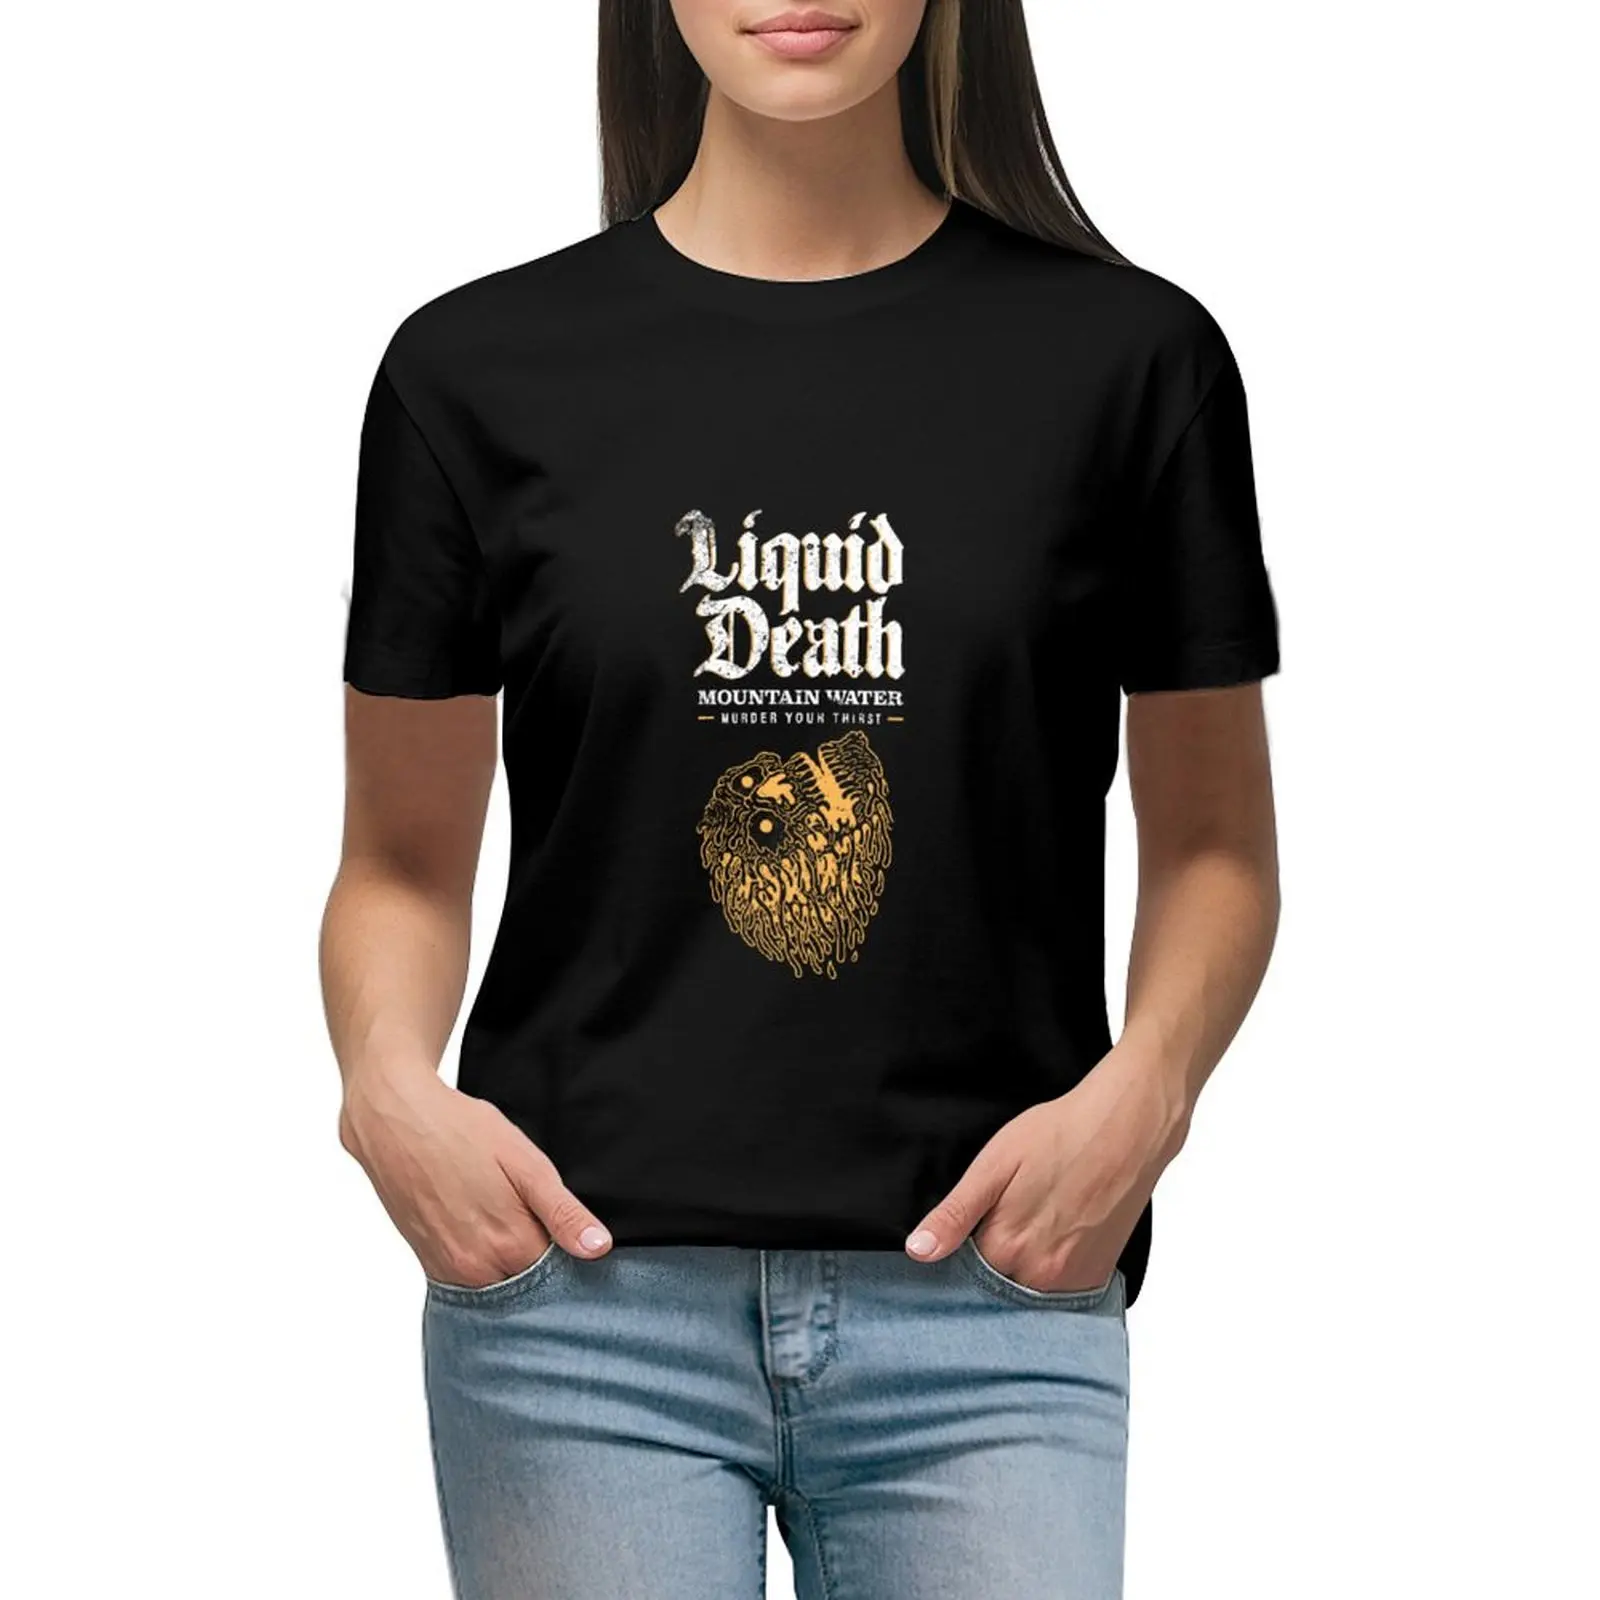 

Liquid Death Distressed vintage T-shirt Aesthetic clothing plus size tops anime clothes black t shirts for Women